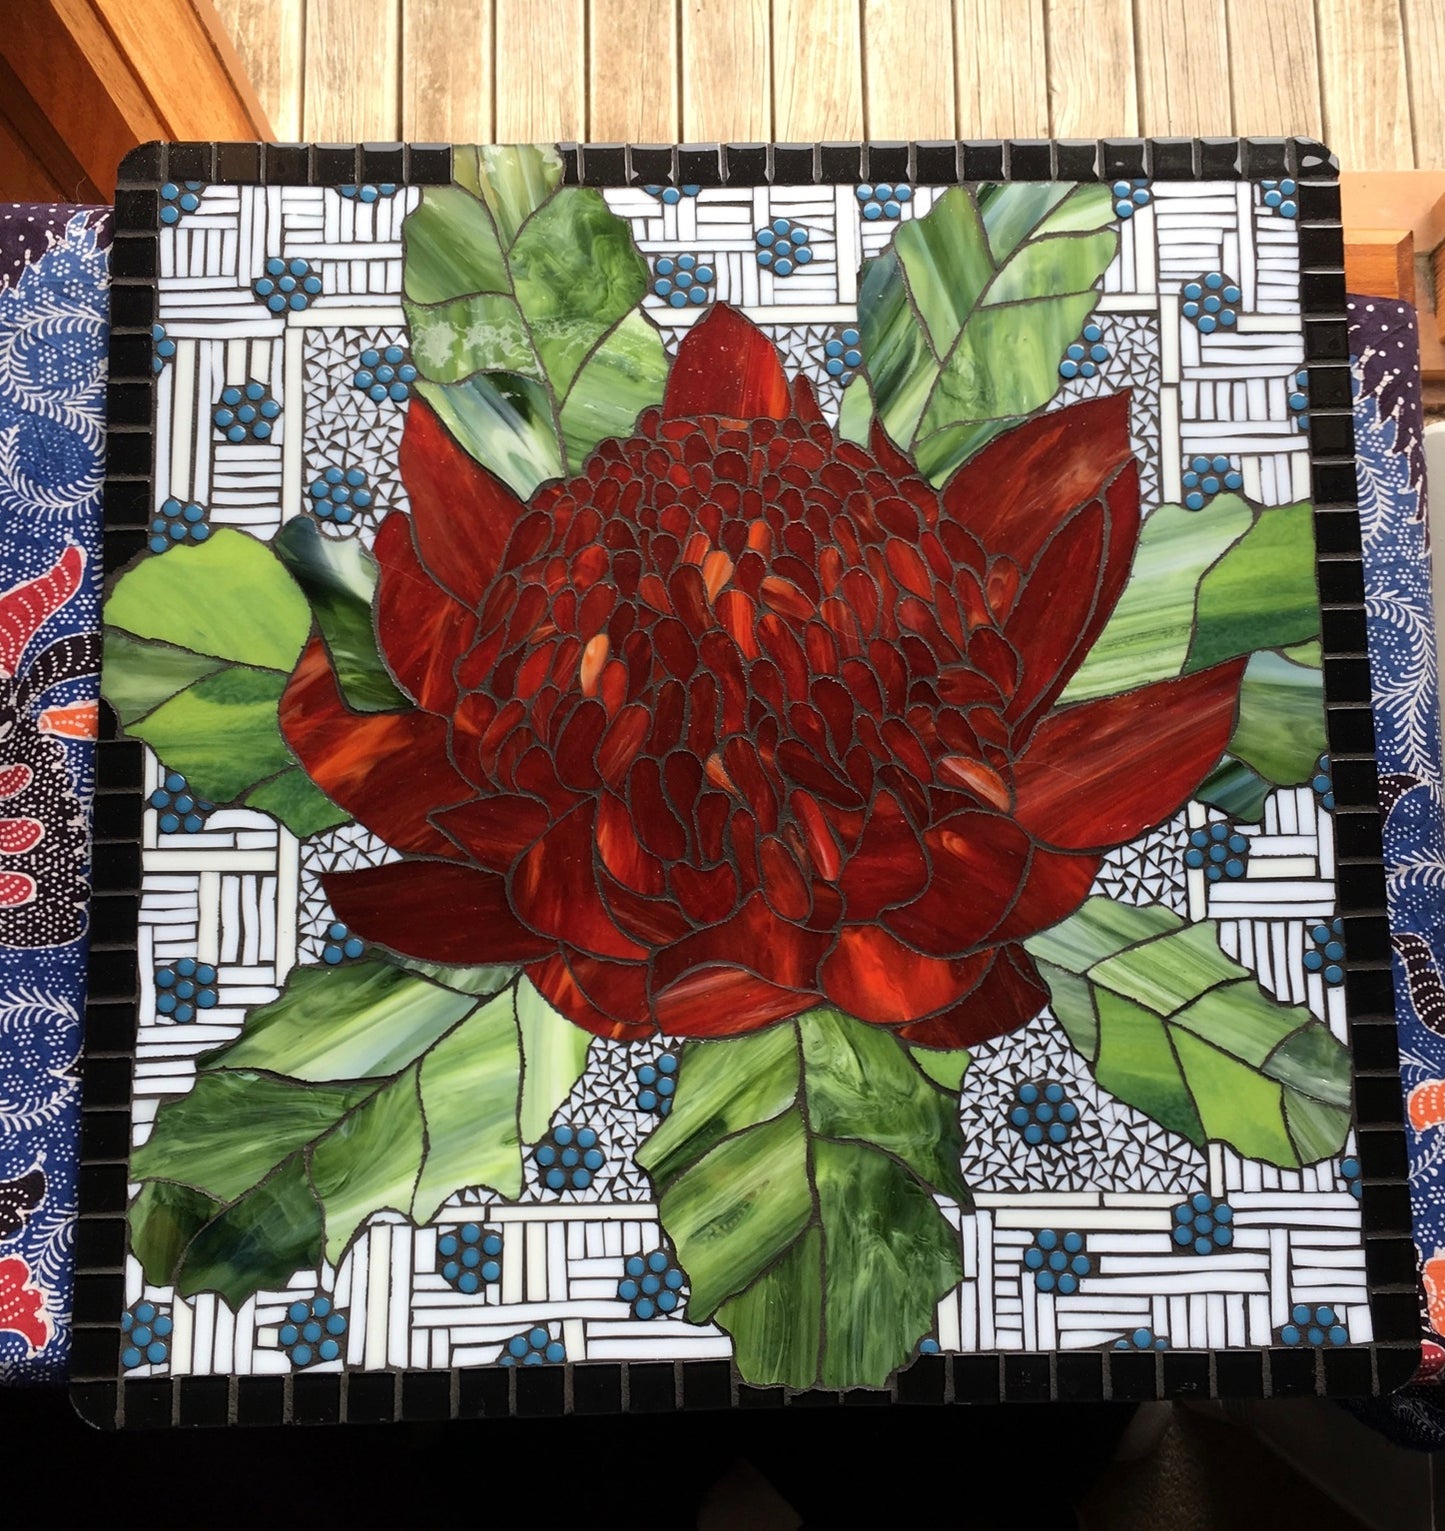 Waratah with Mint Bushes - SOLD